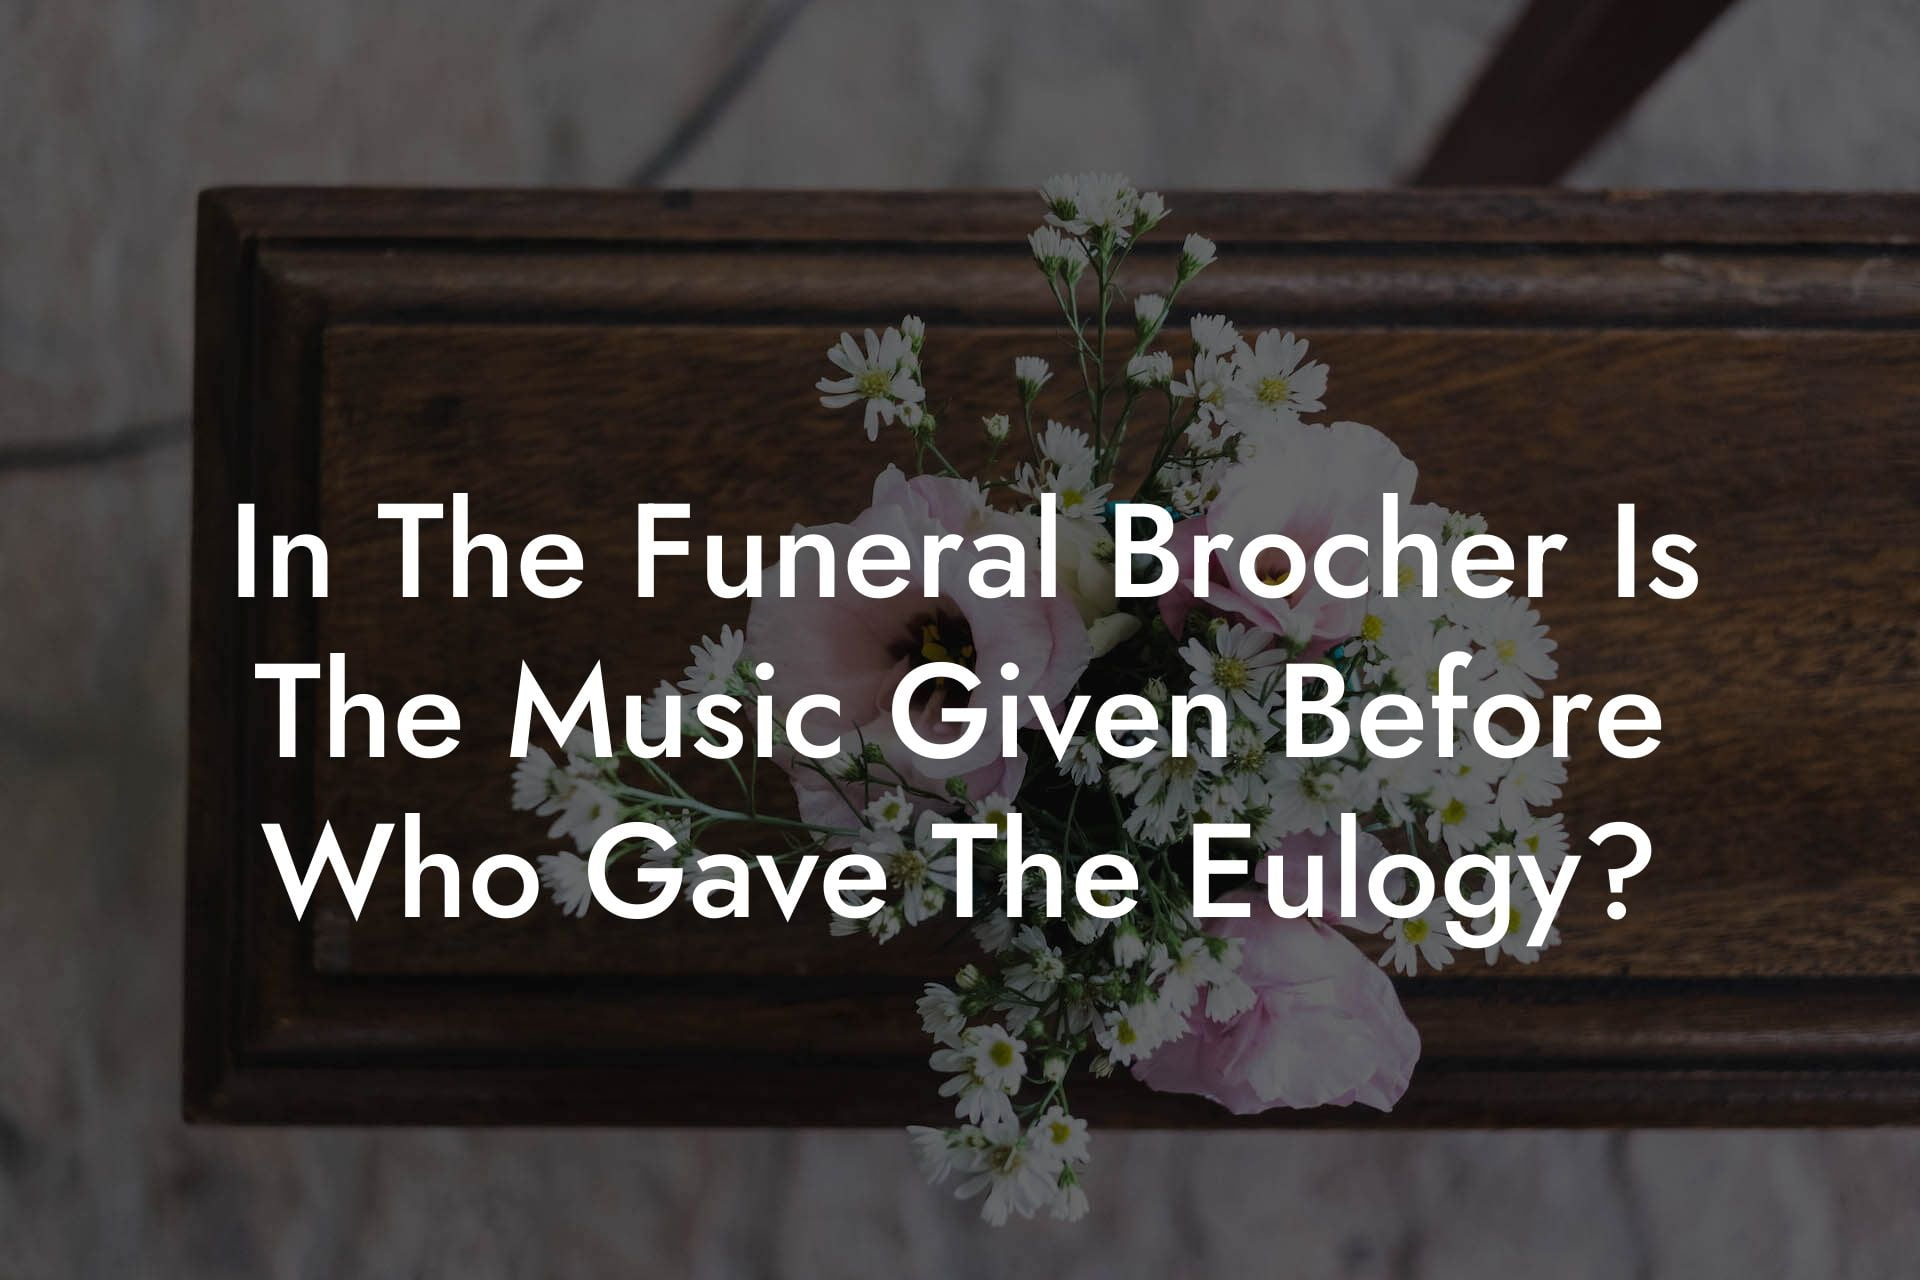 In The Funeral Brocher Is The Music Given Before Who Gave The Eulogy?